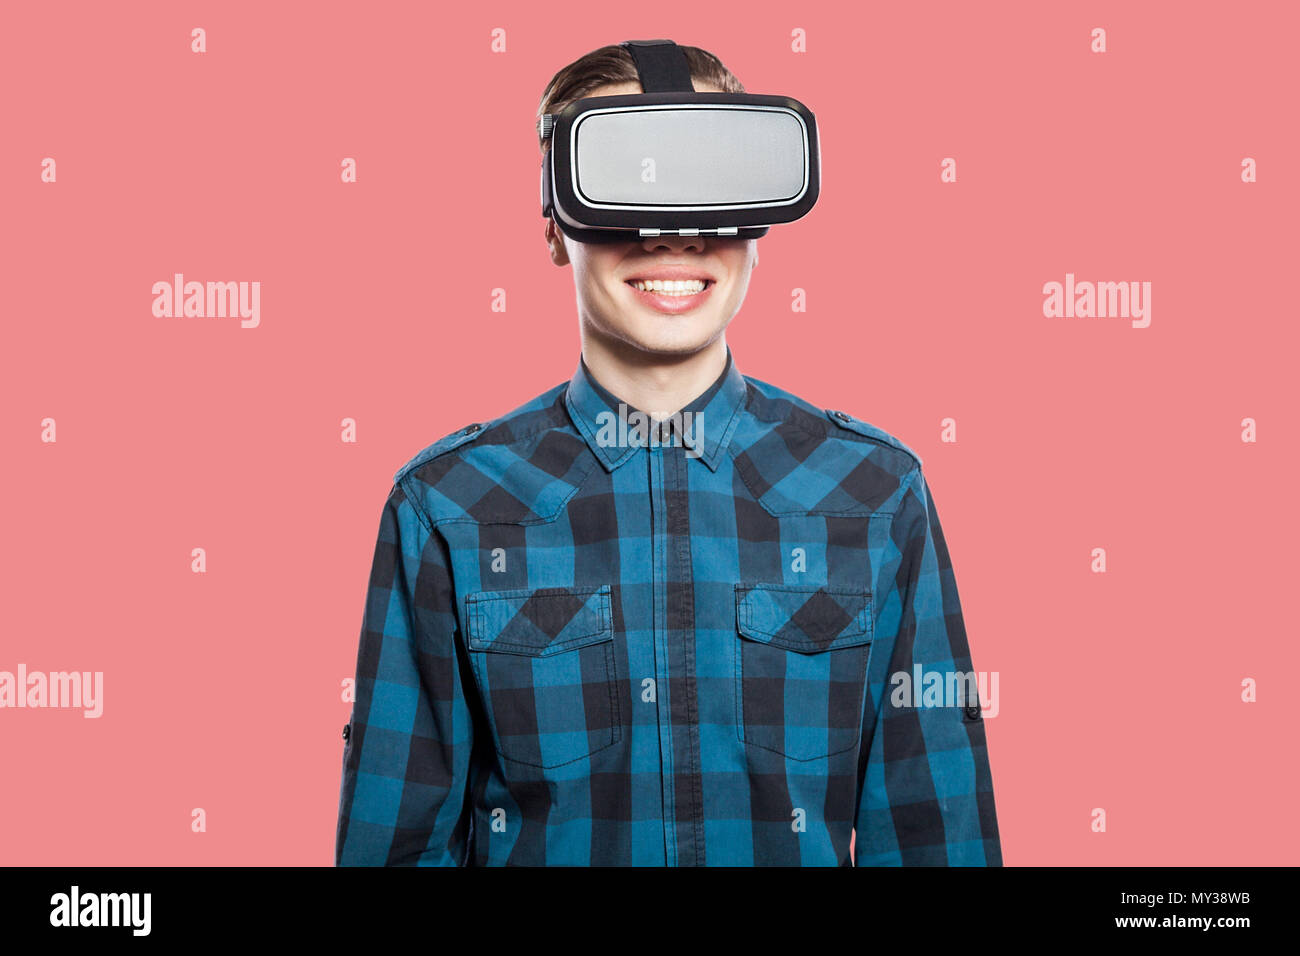 Happy smiling young man with vr headset. studio shot, isolated on pink background. Stock Photo